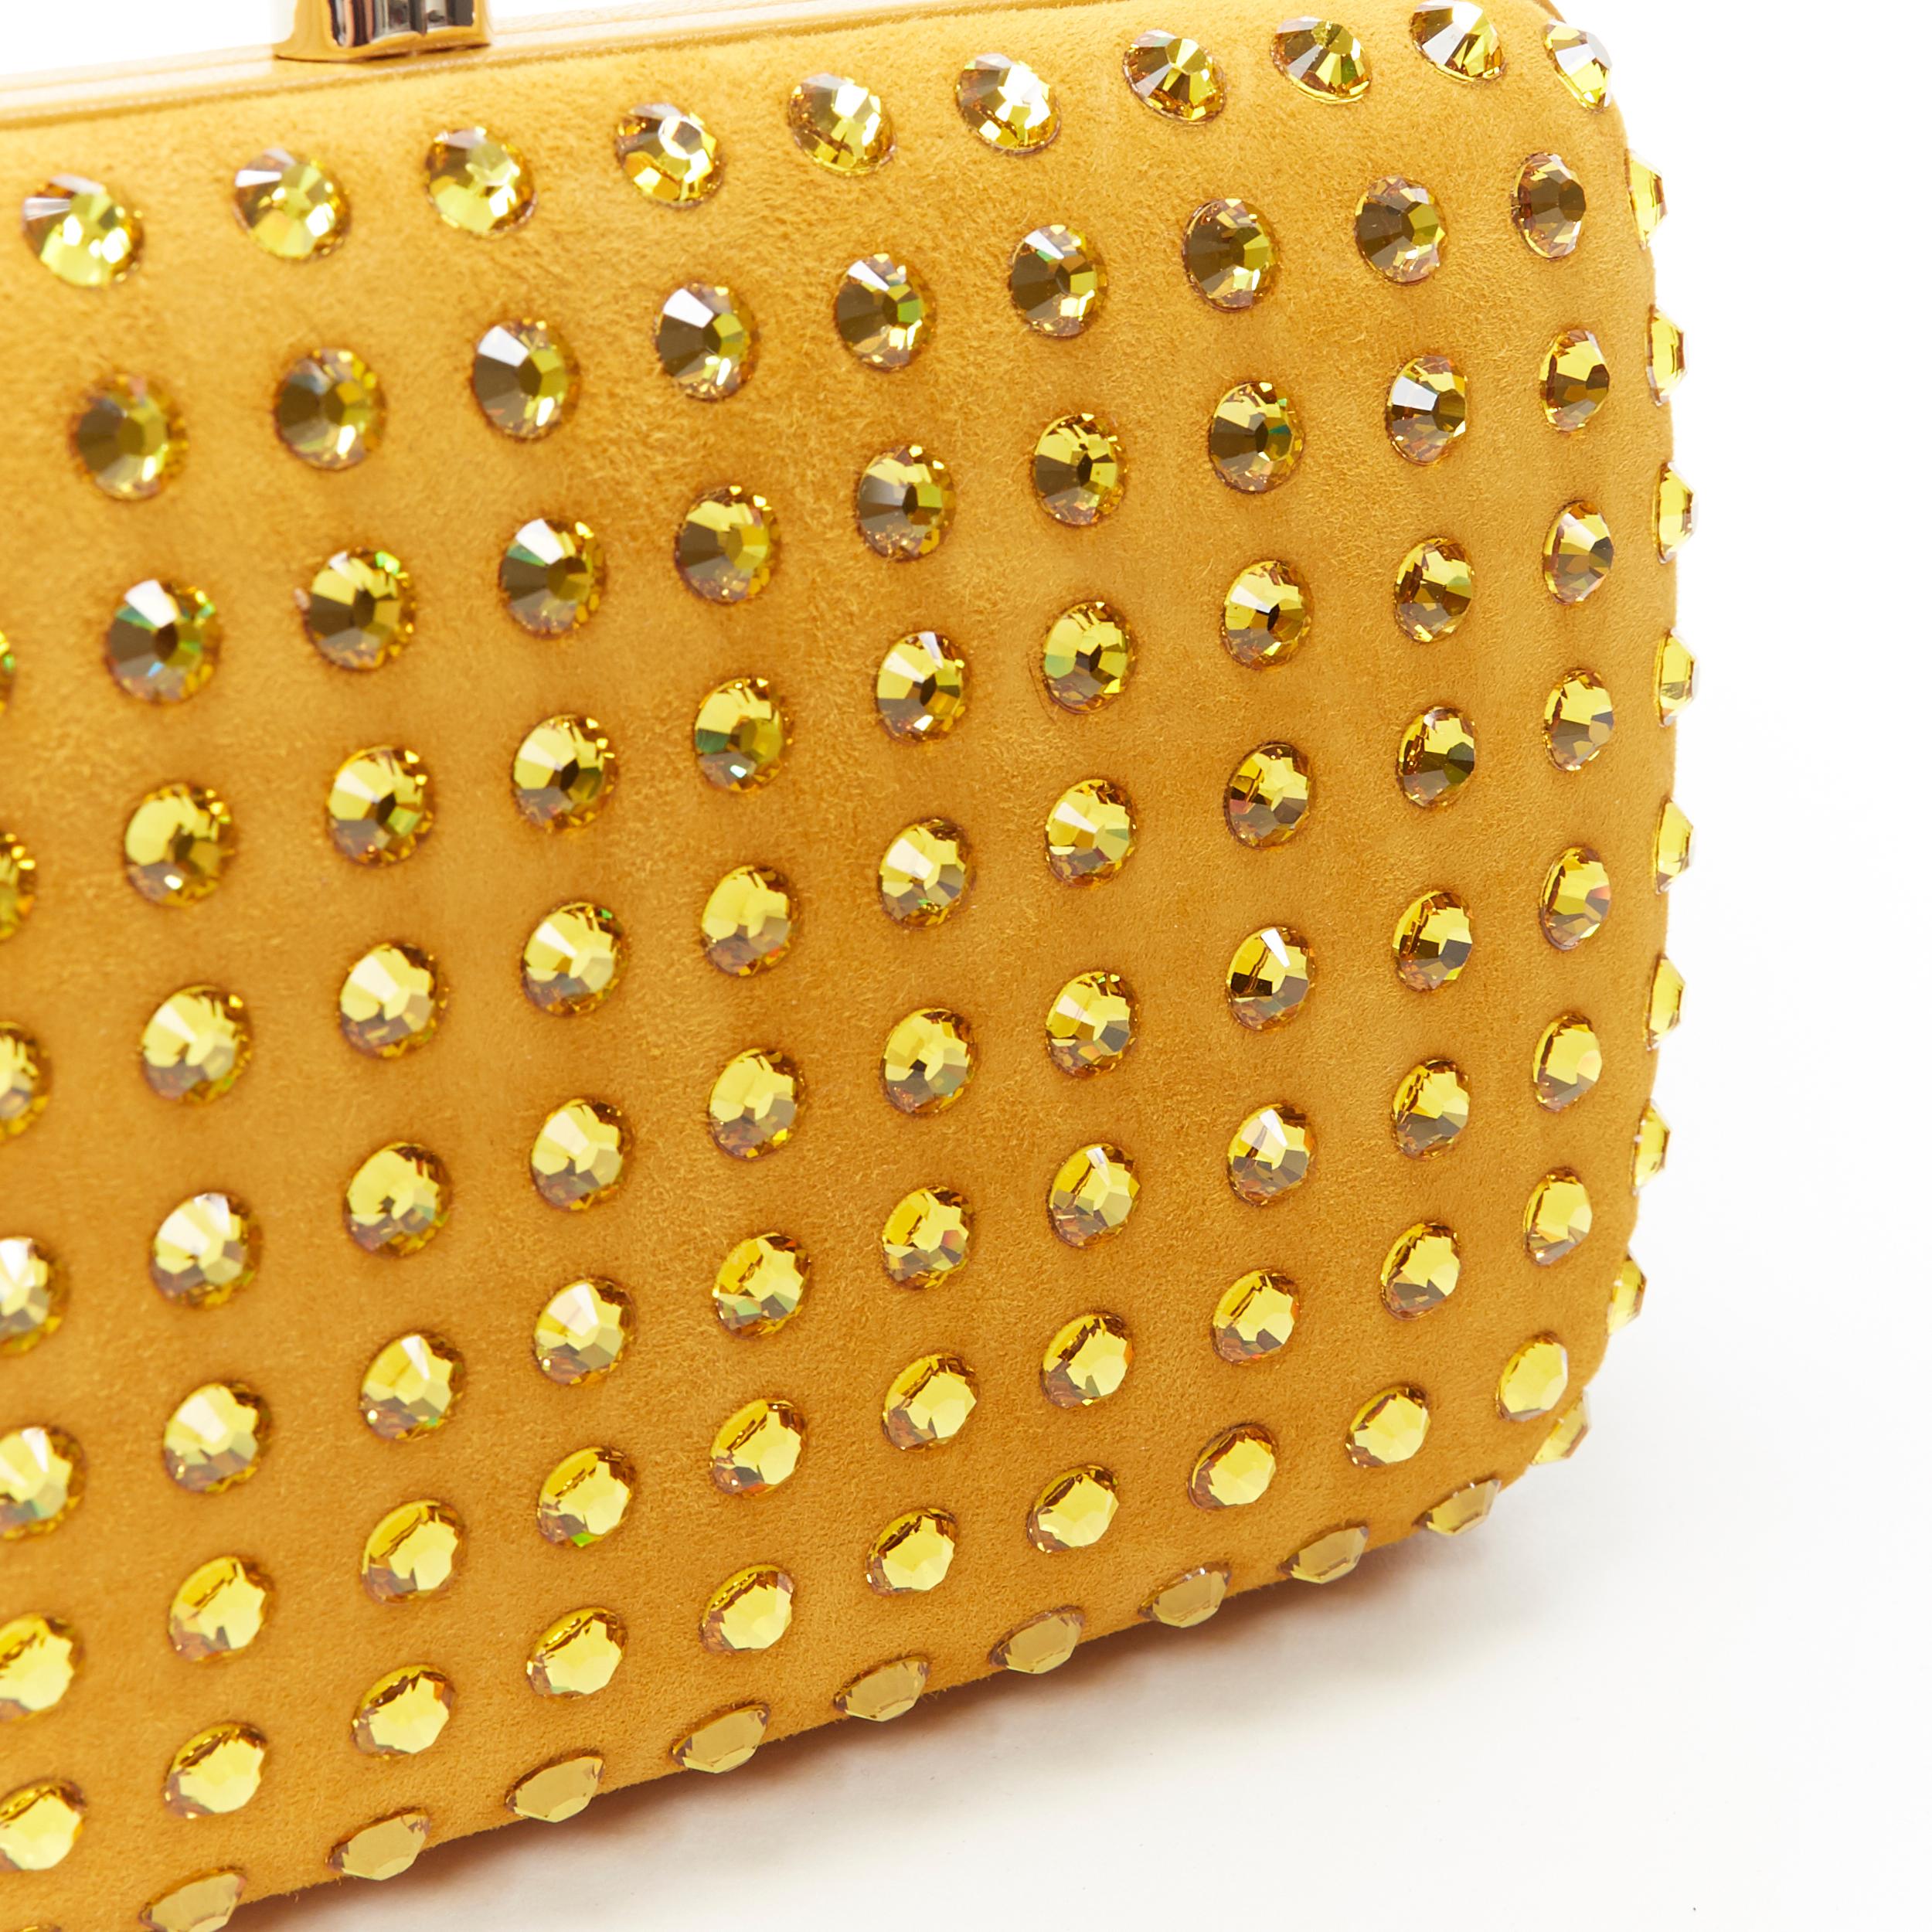 Yellow GUCCI marigold yellow suede crystal embellished leather trimmed box clutch bag